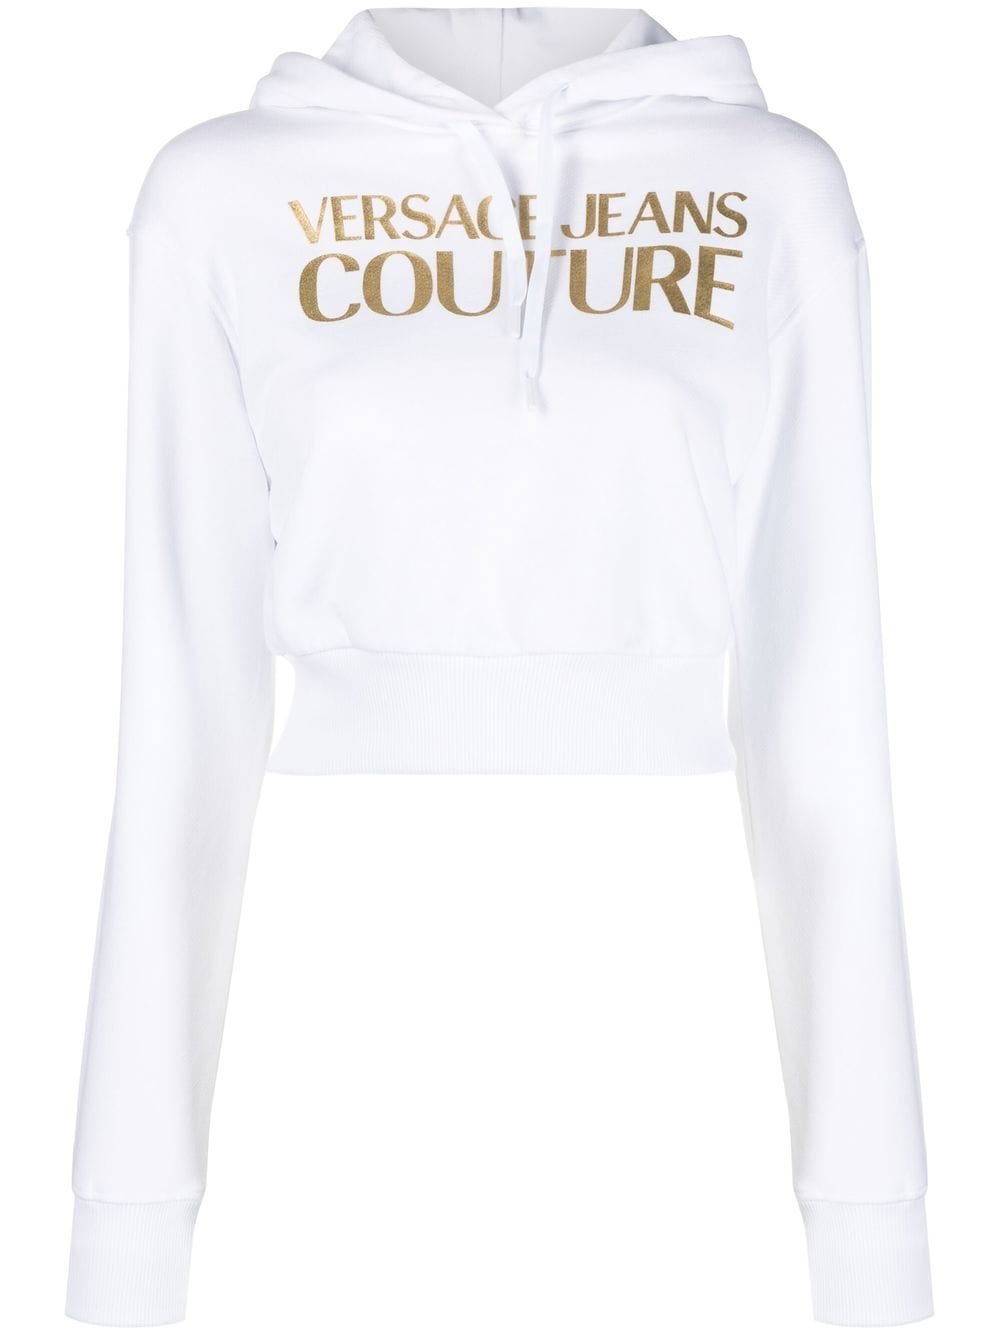 VERSACE JEANS COUTURE LOGO-PRINT HOODIE